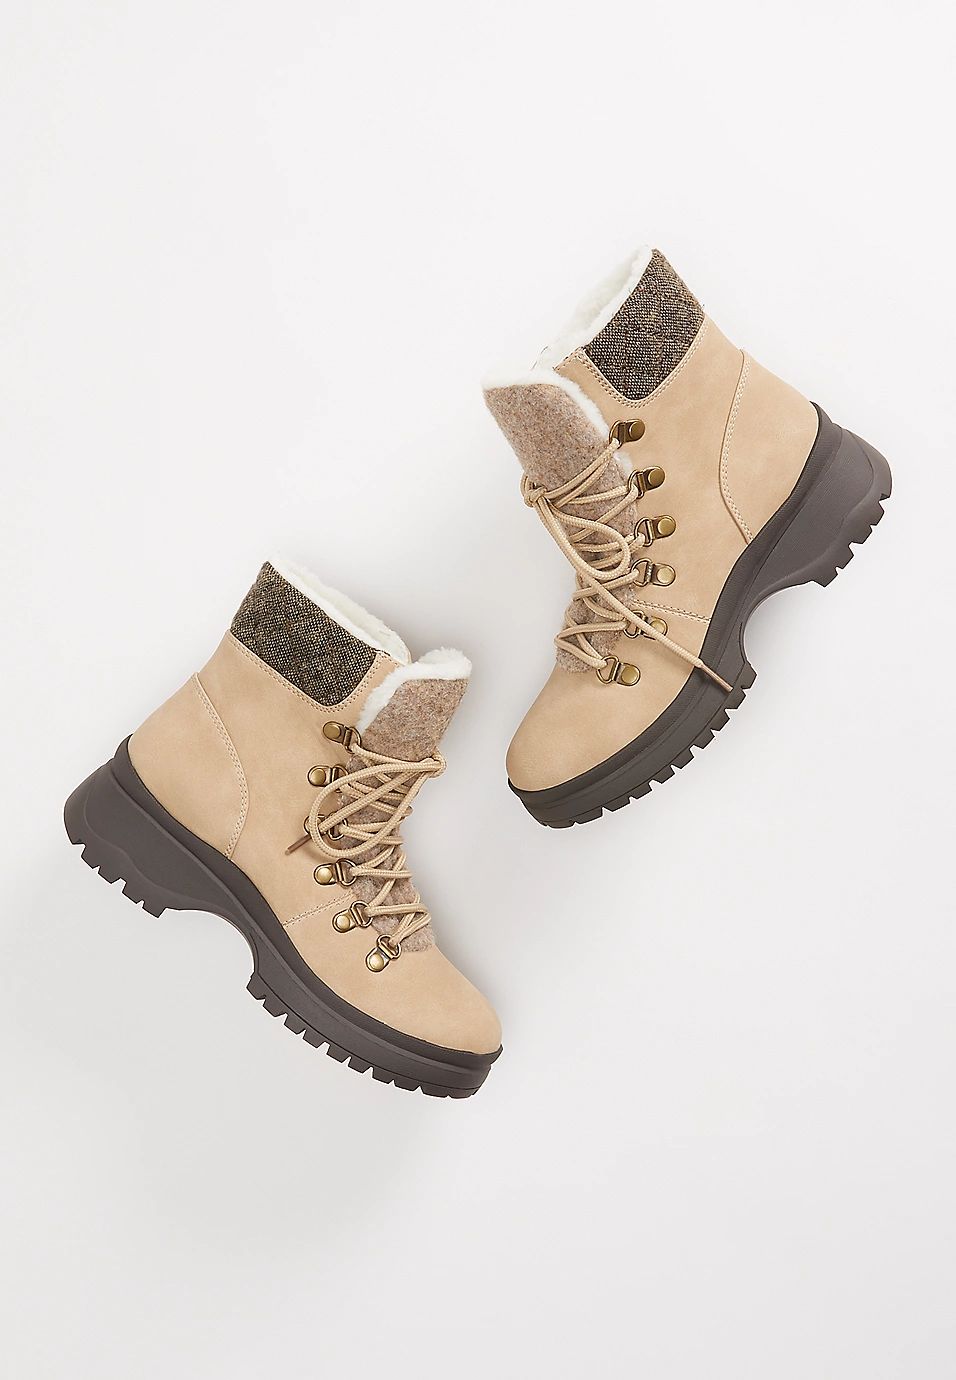 Raven Outdoor Adventure Boot | Maurices